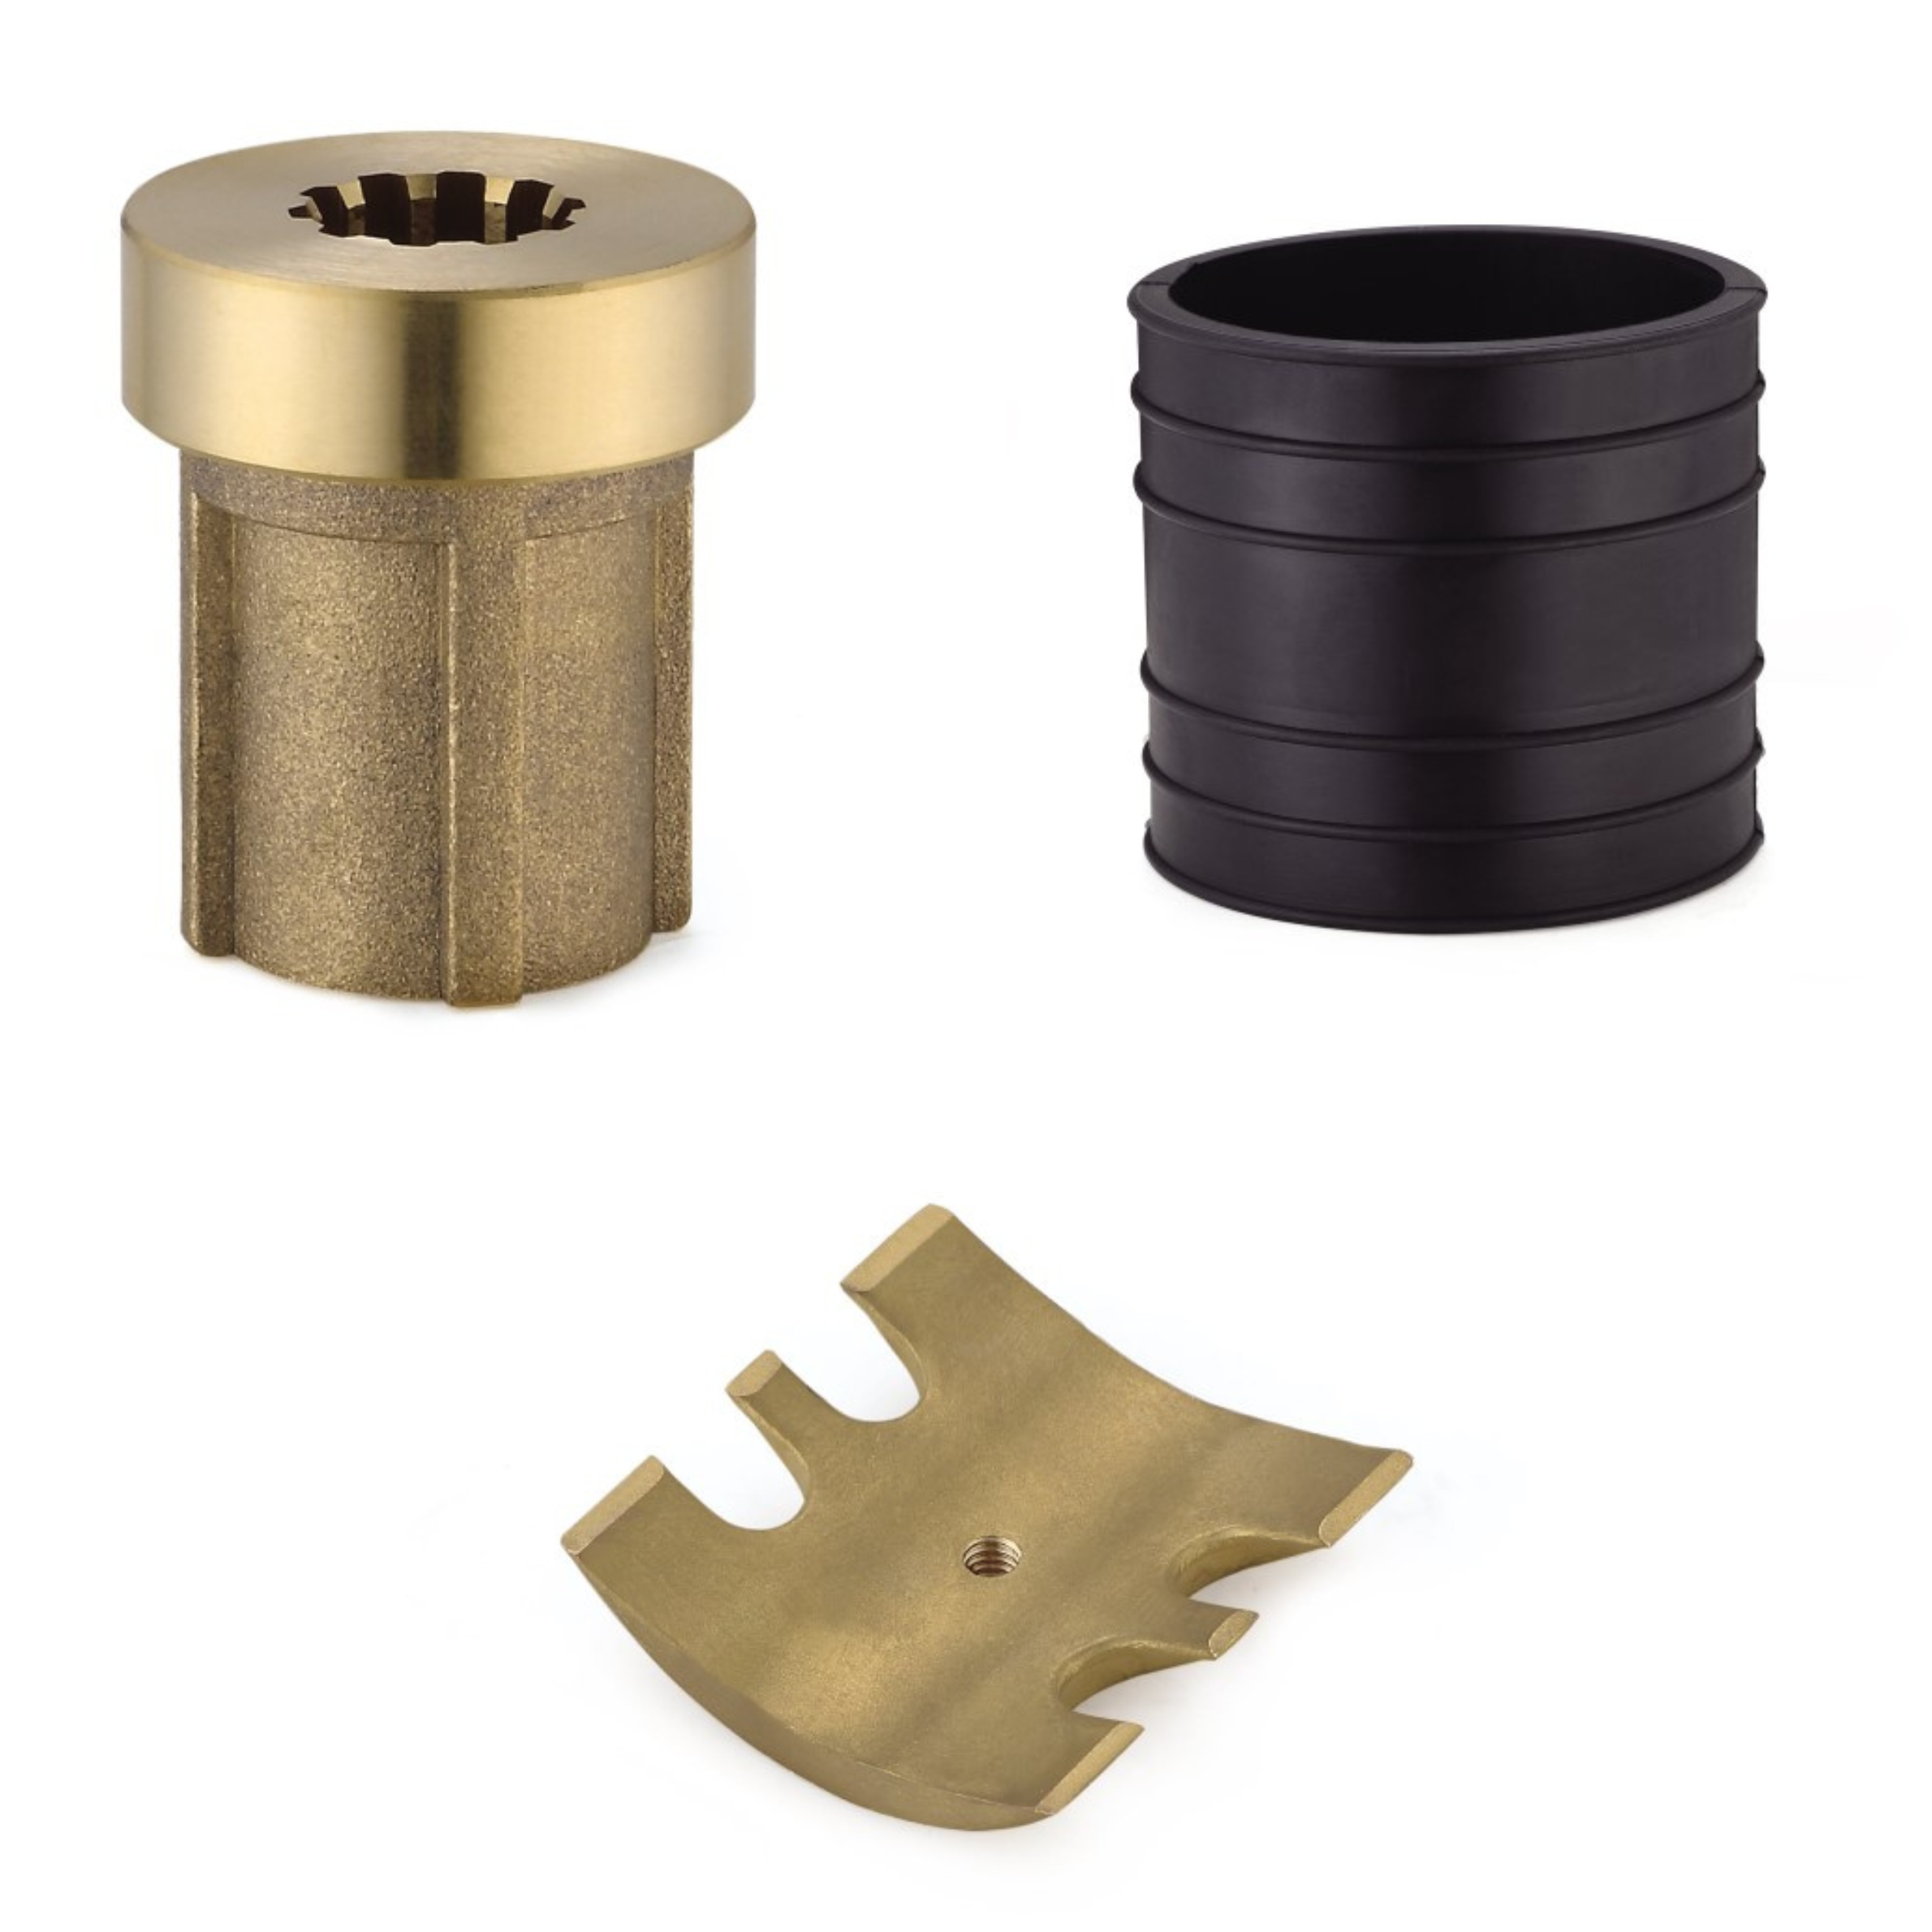 Products Mechanical parts